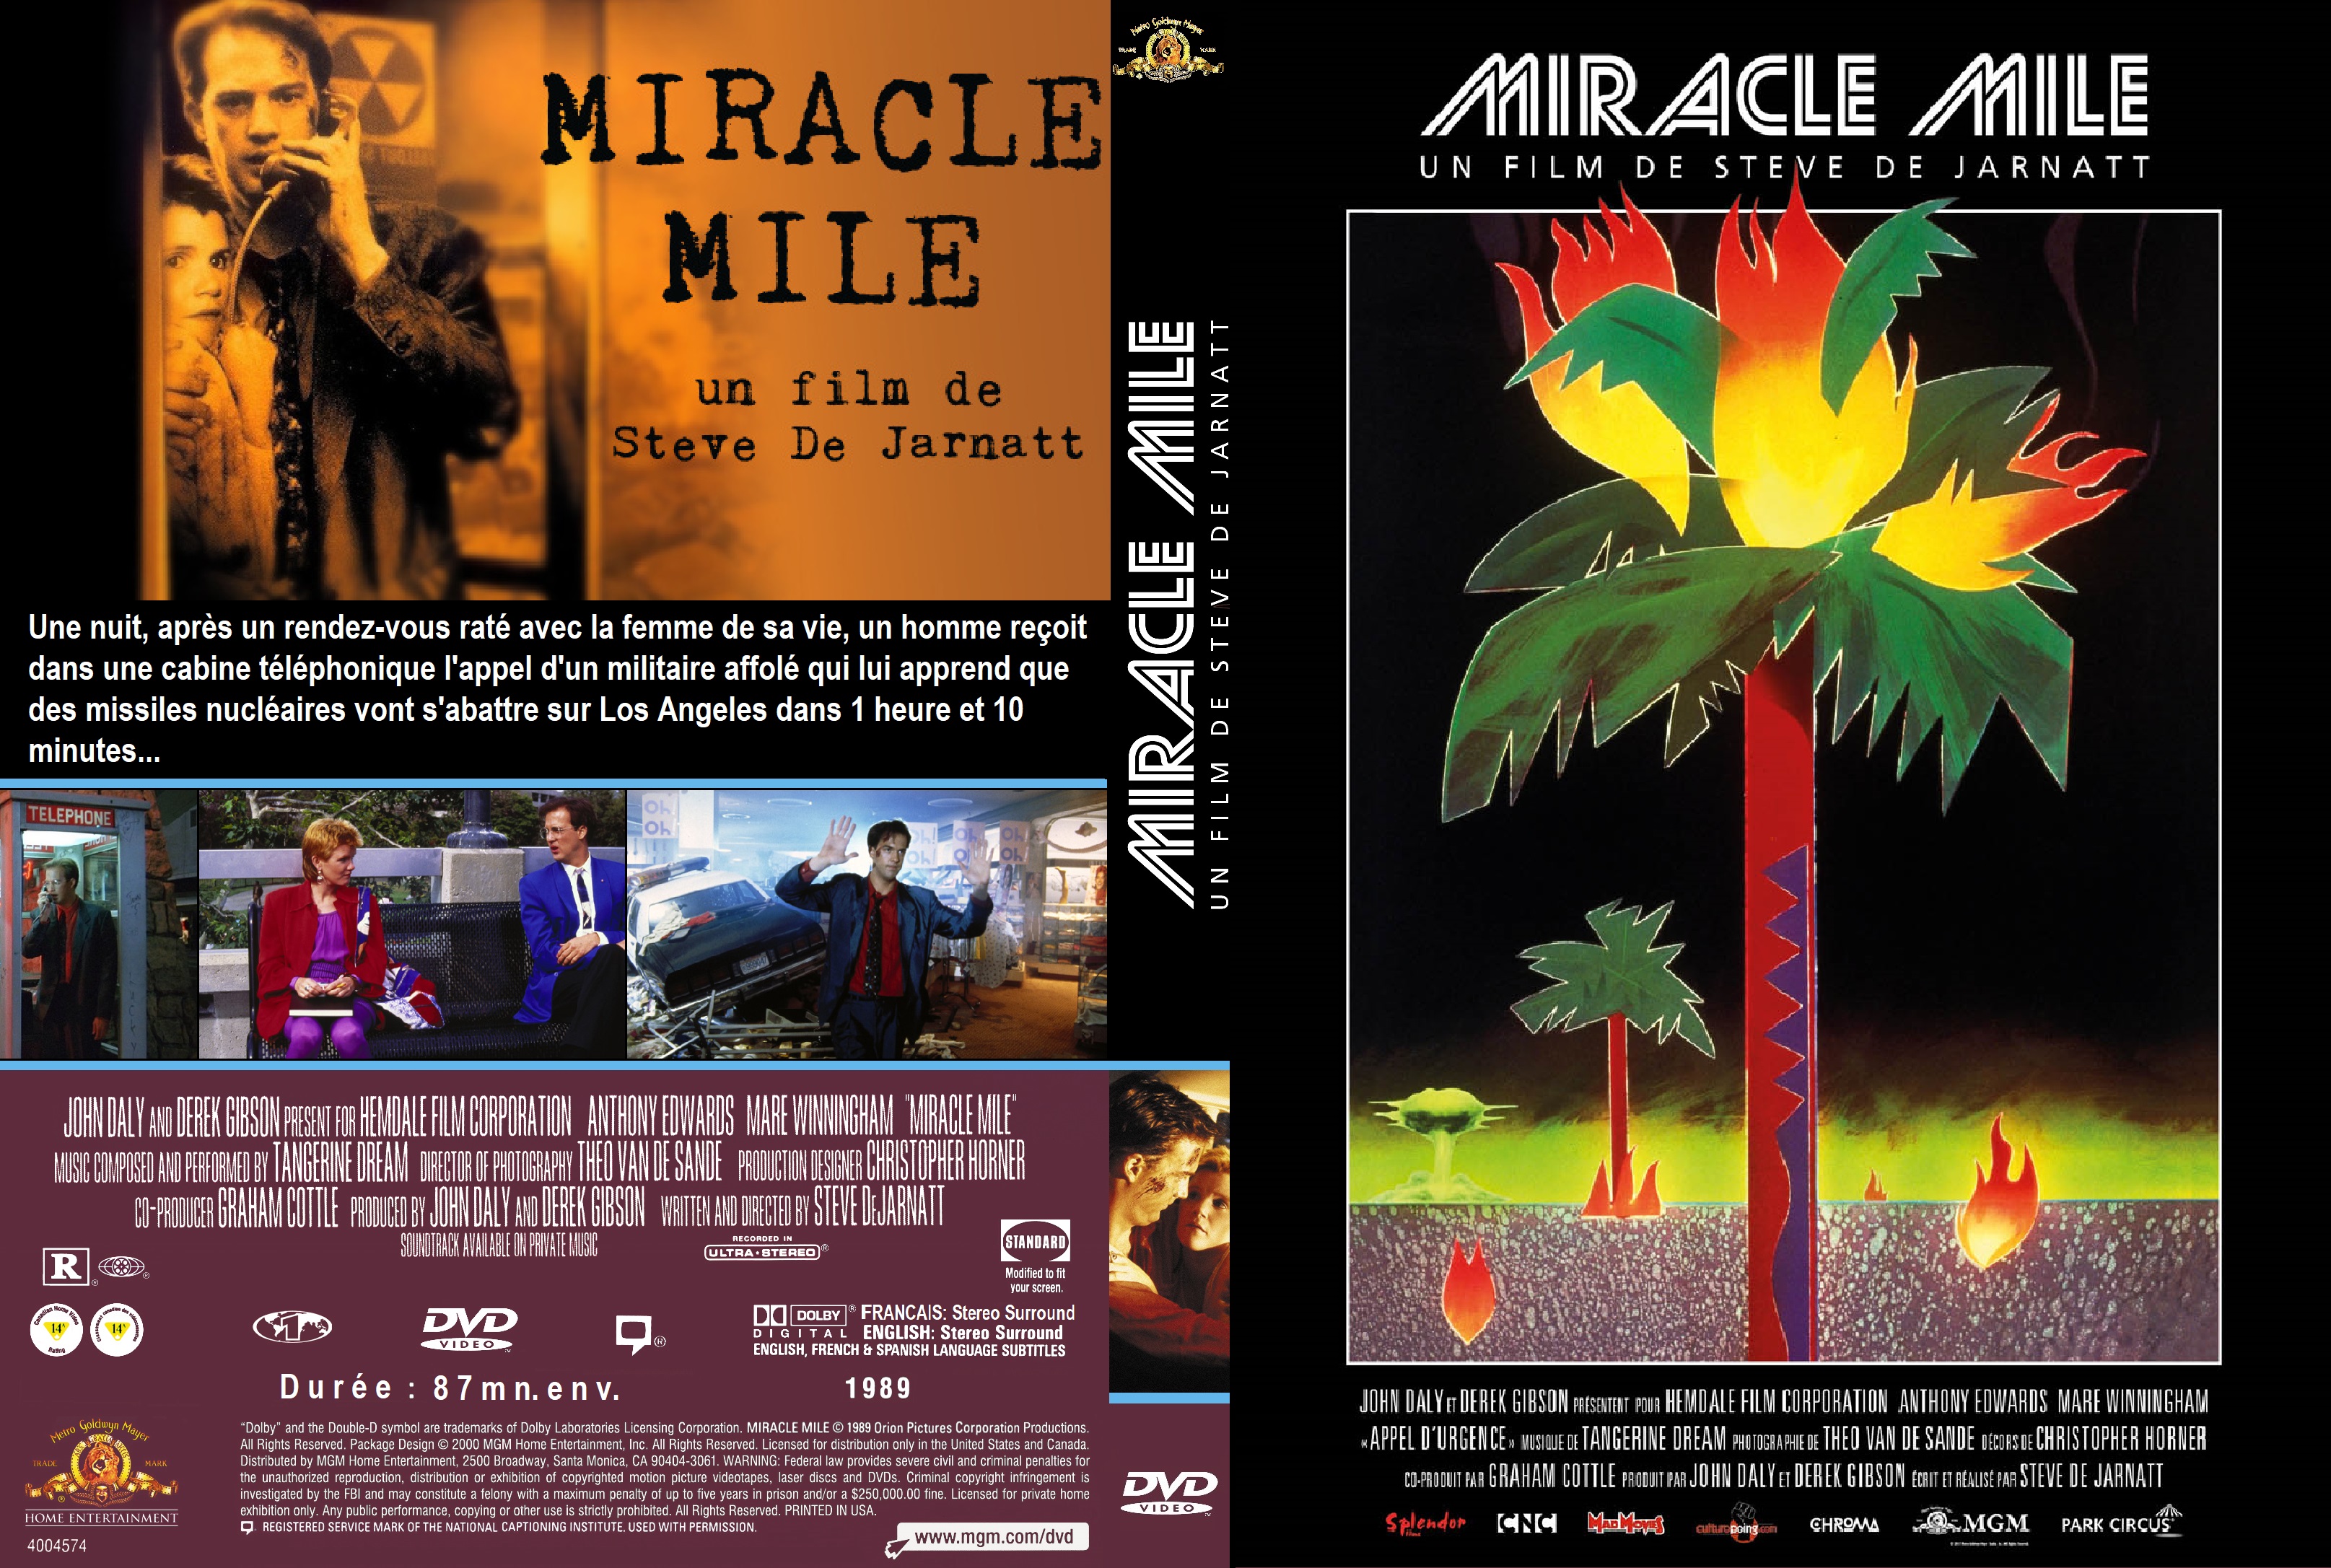 Jaquette DVD Miracle Mile custom